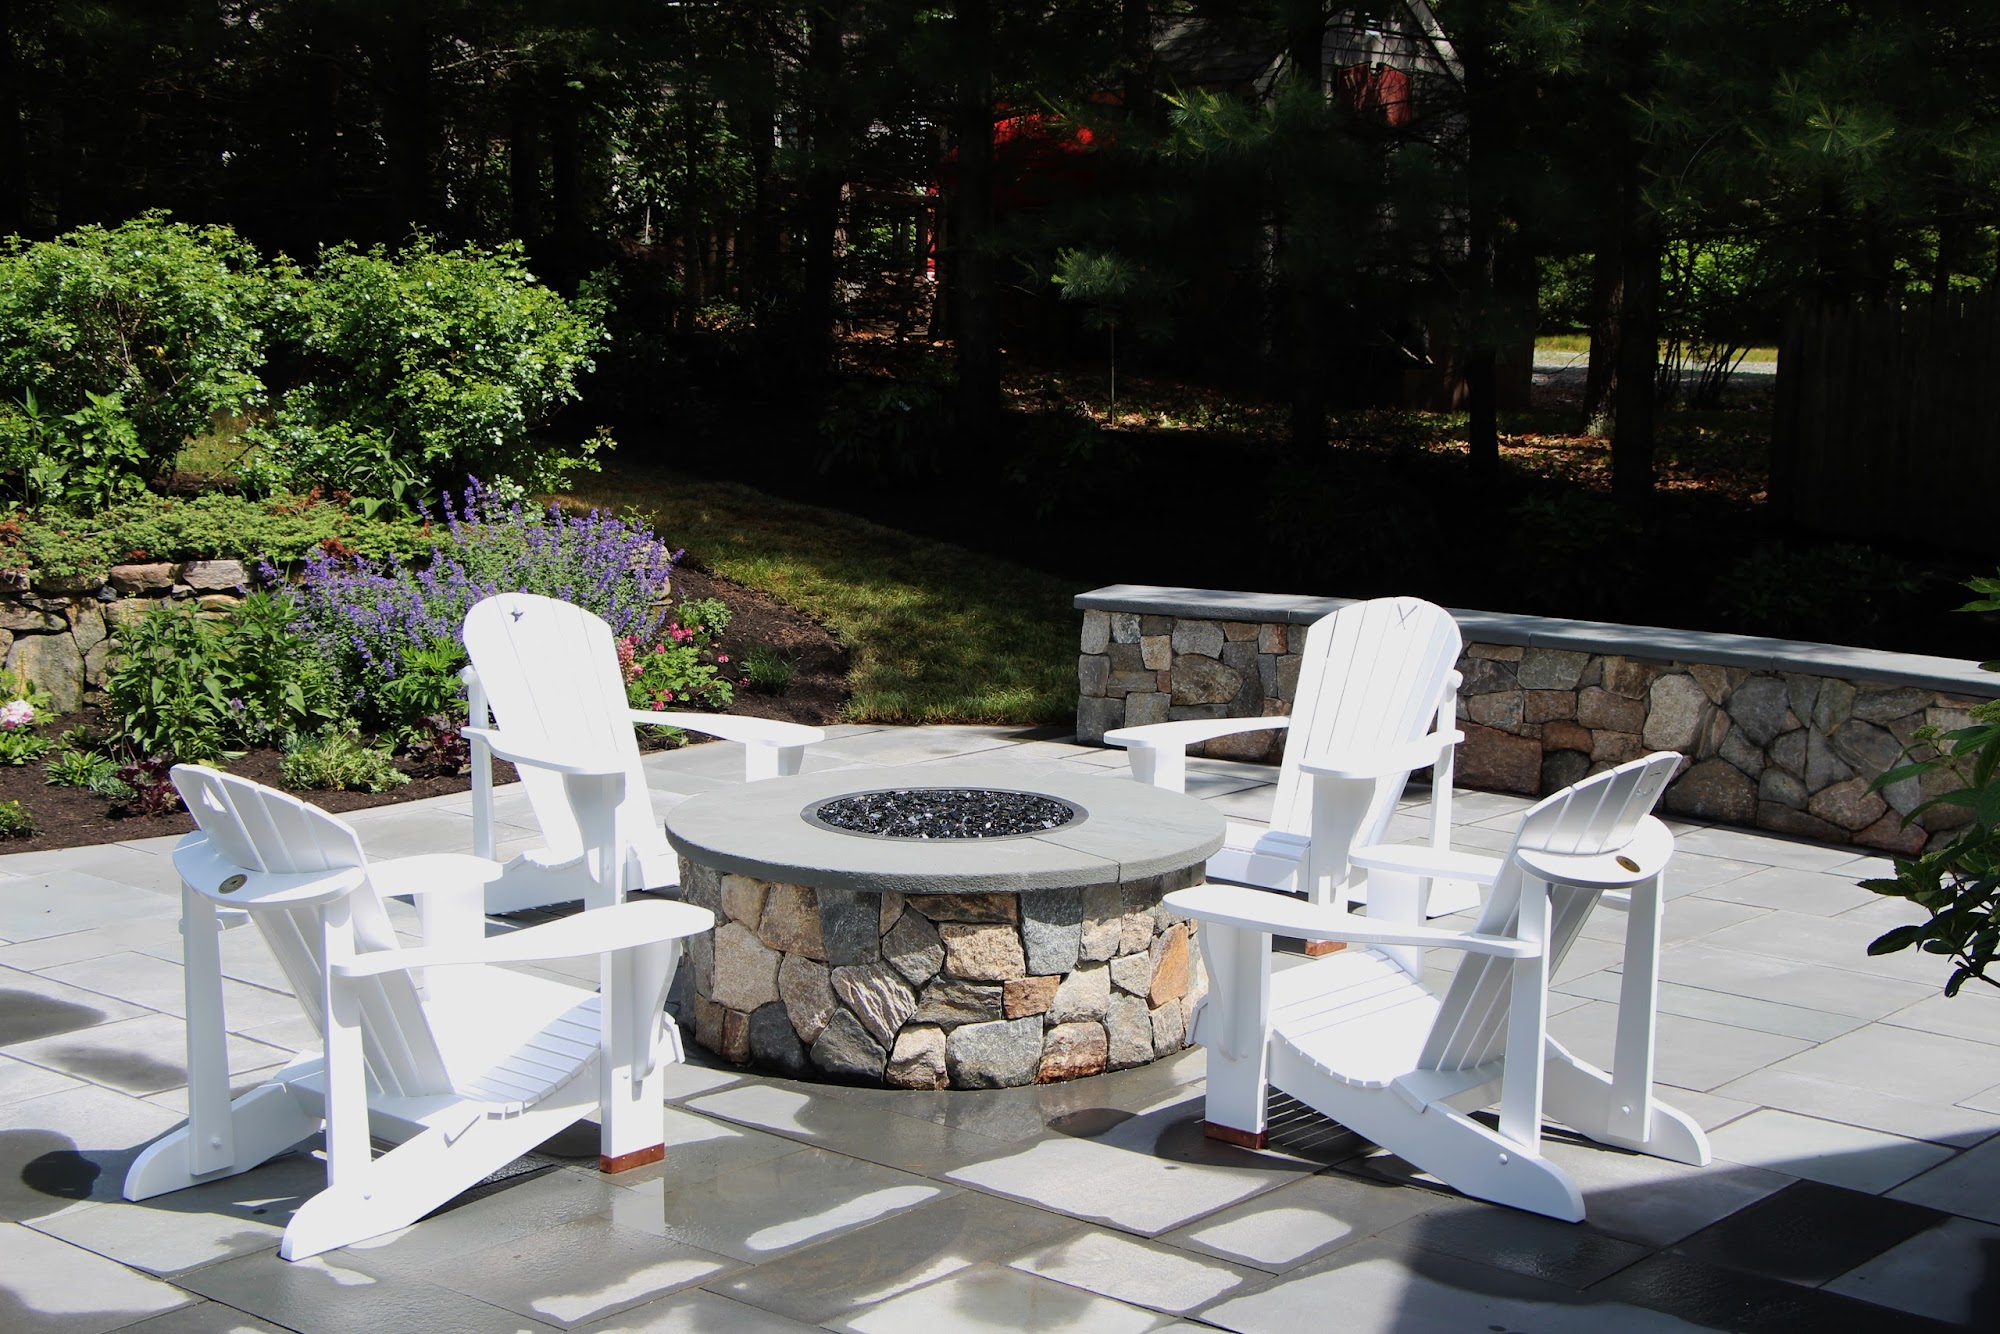 O’Leary Landscaping 129 Queen Anne Rd, Harwich Massachusetts 02645